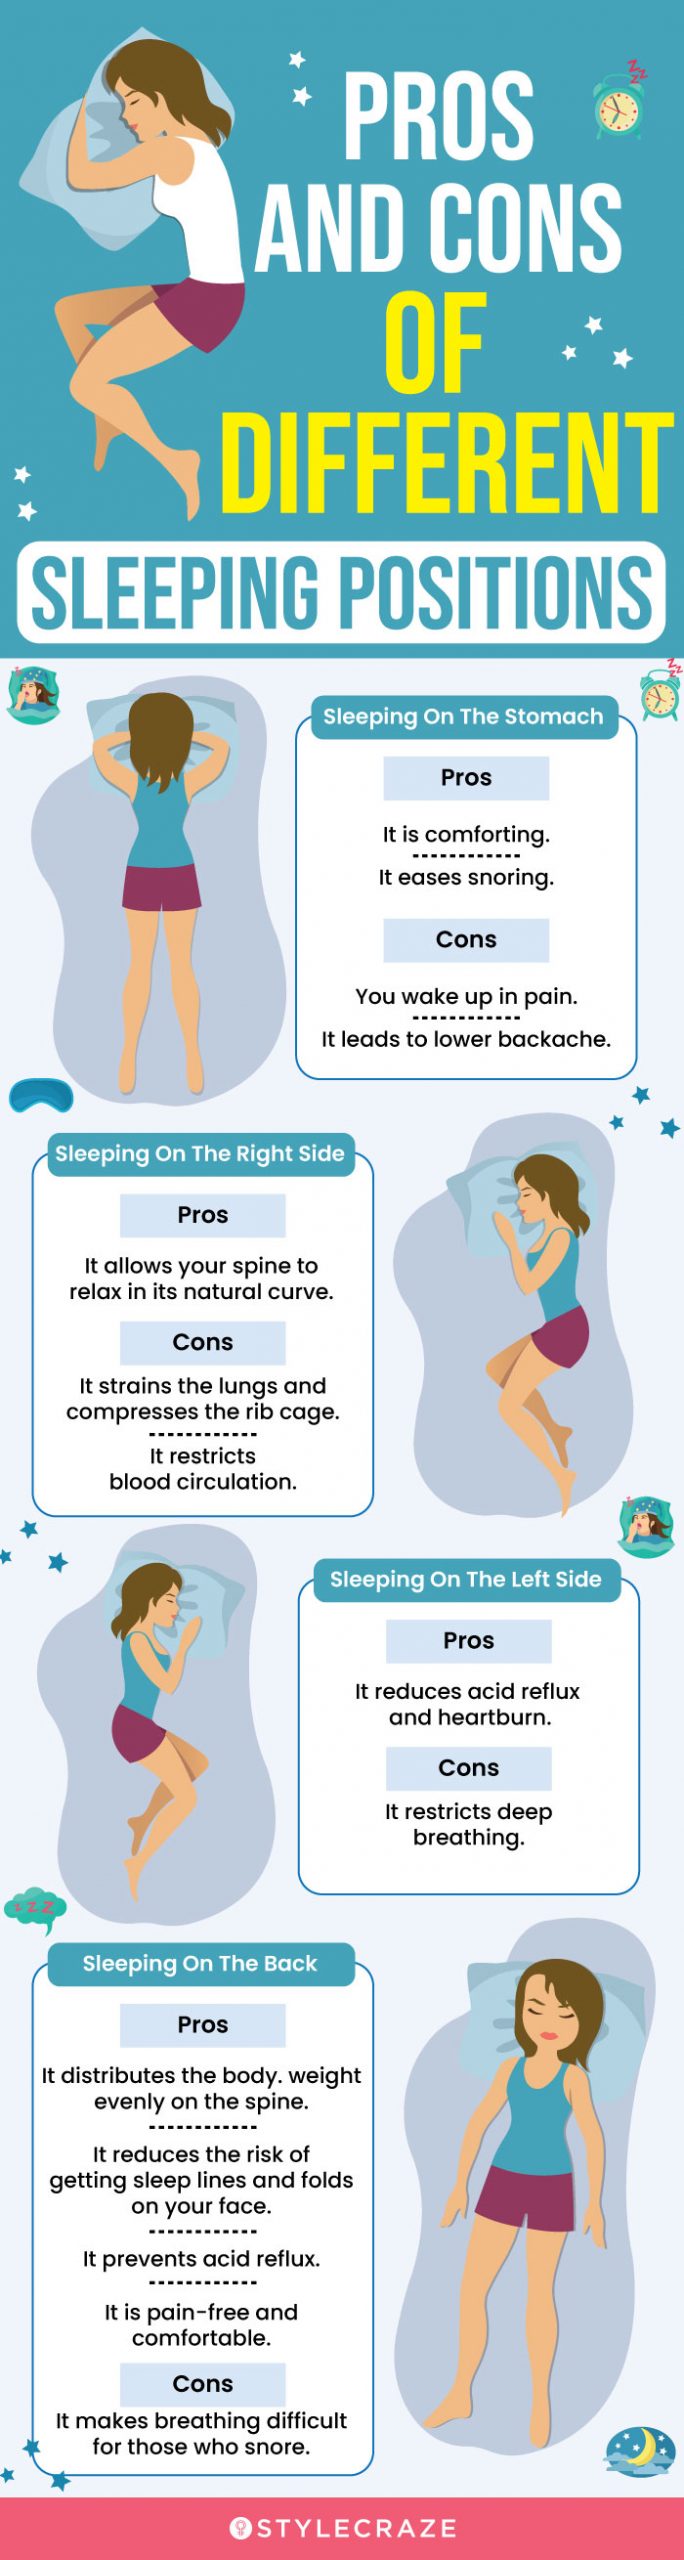 The best sleeping positions and strategies for pain and optimal